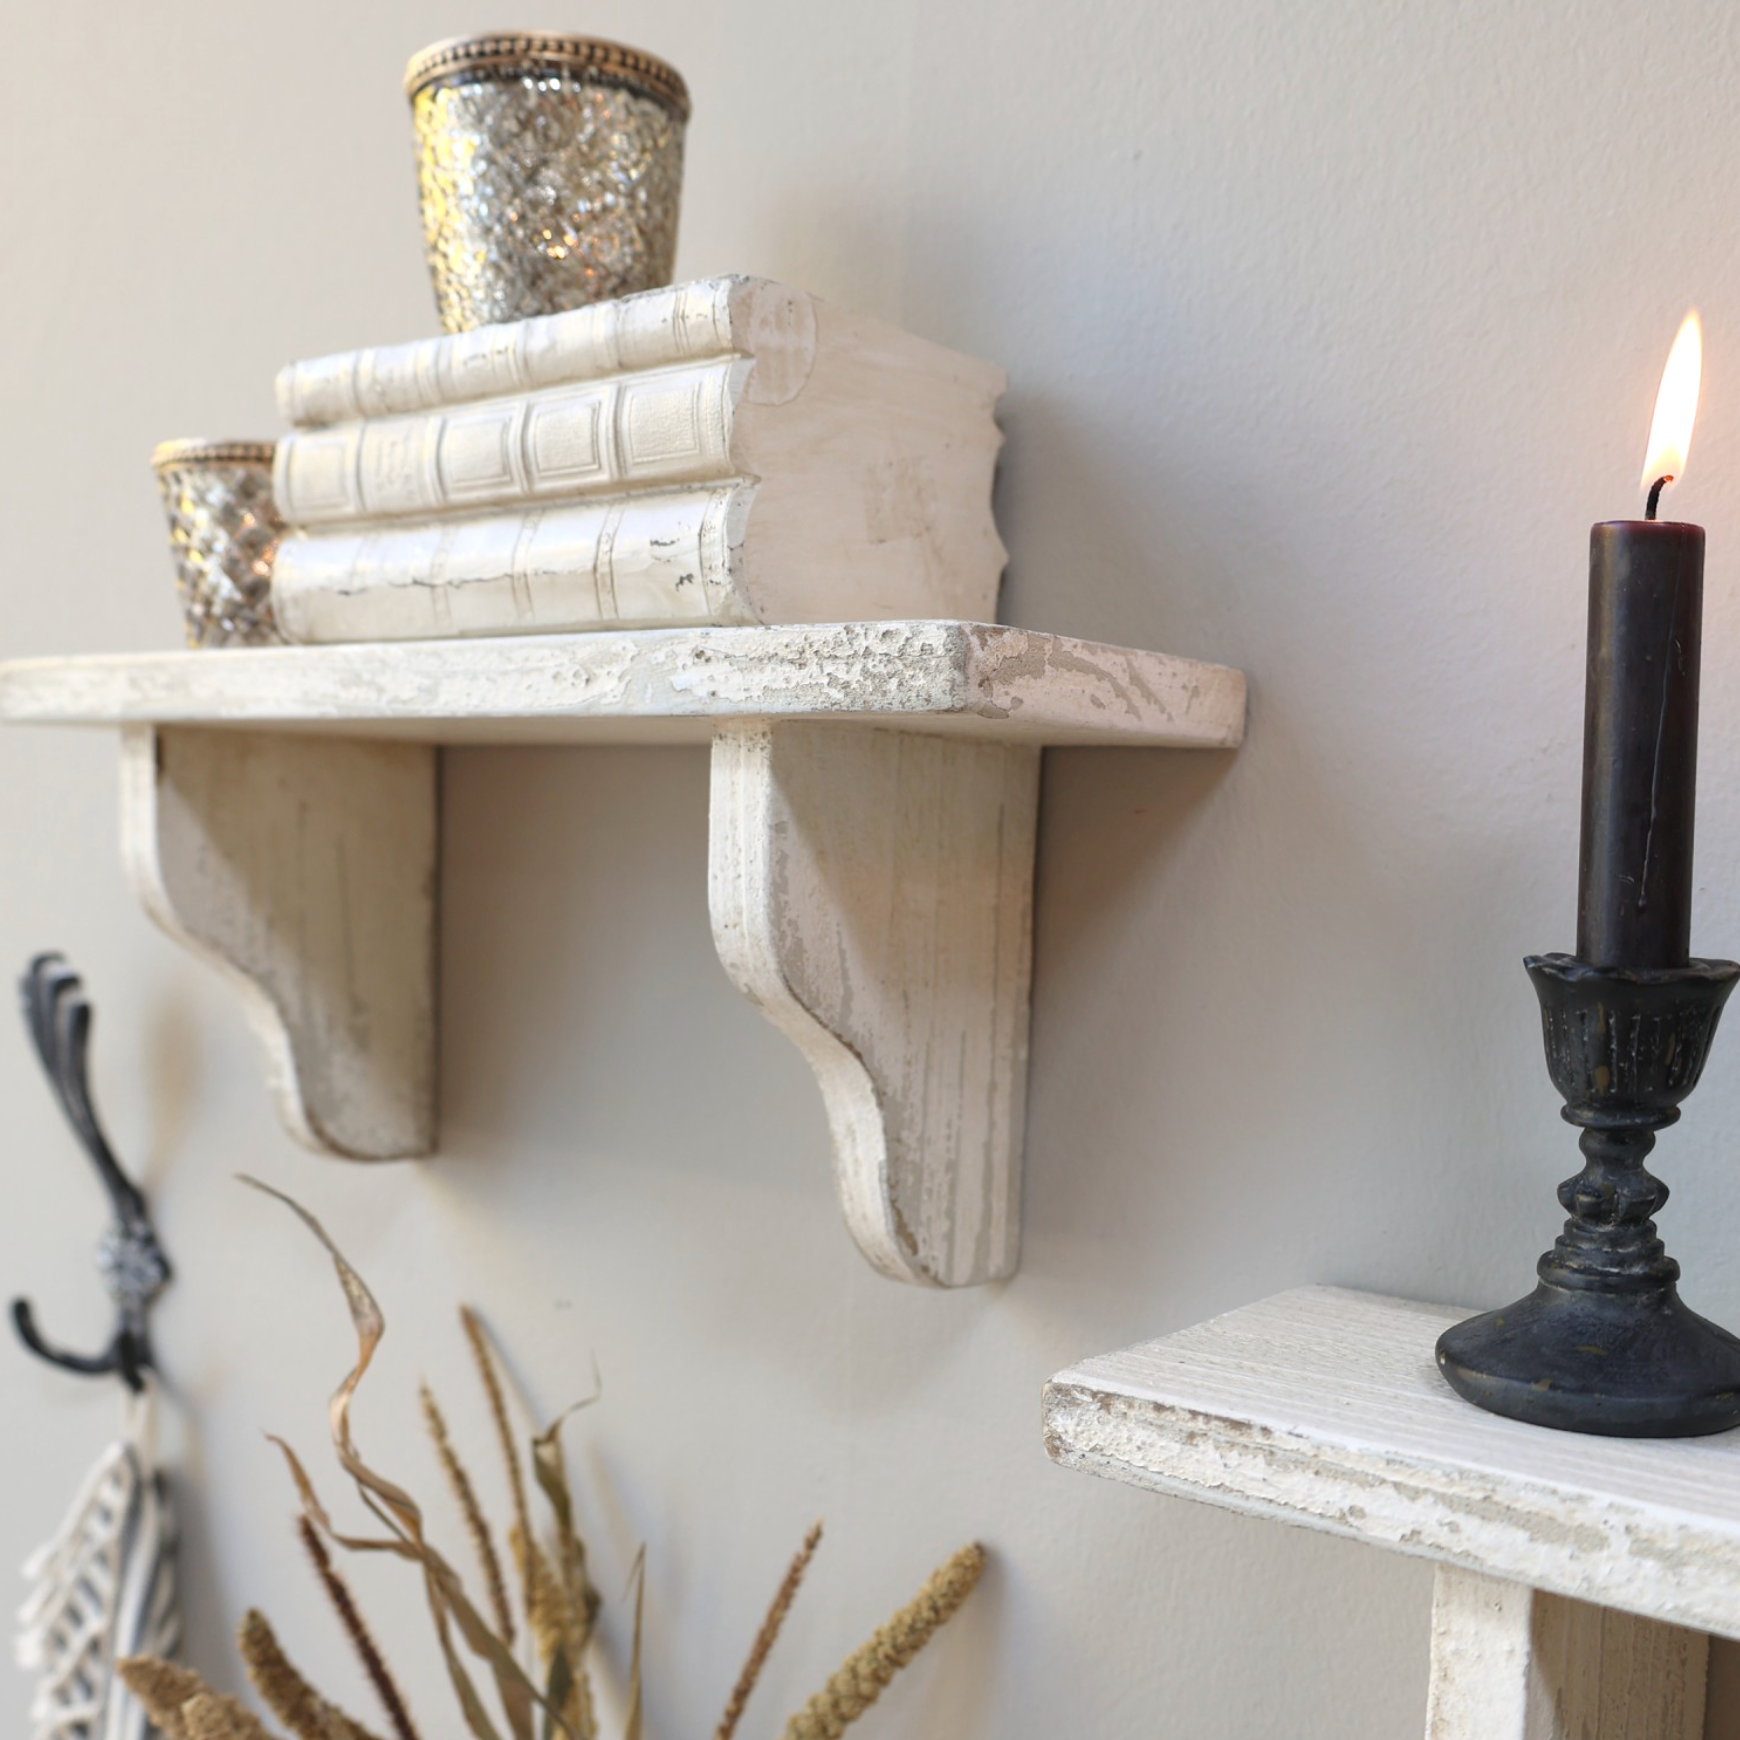 A rustic shelf with aged white finish and decor items.